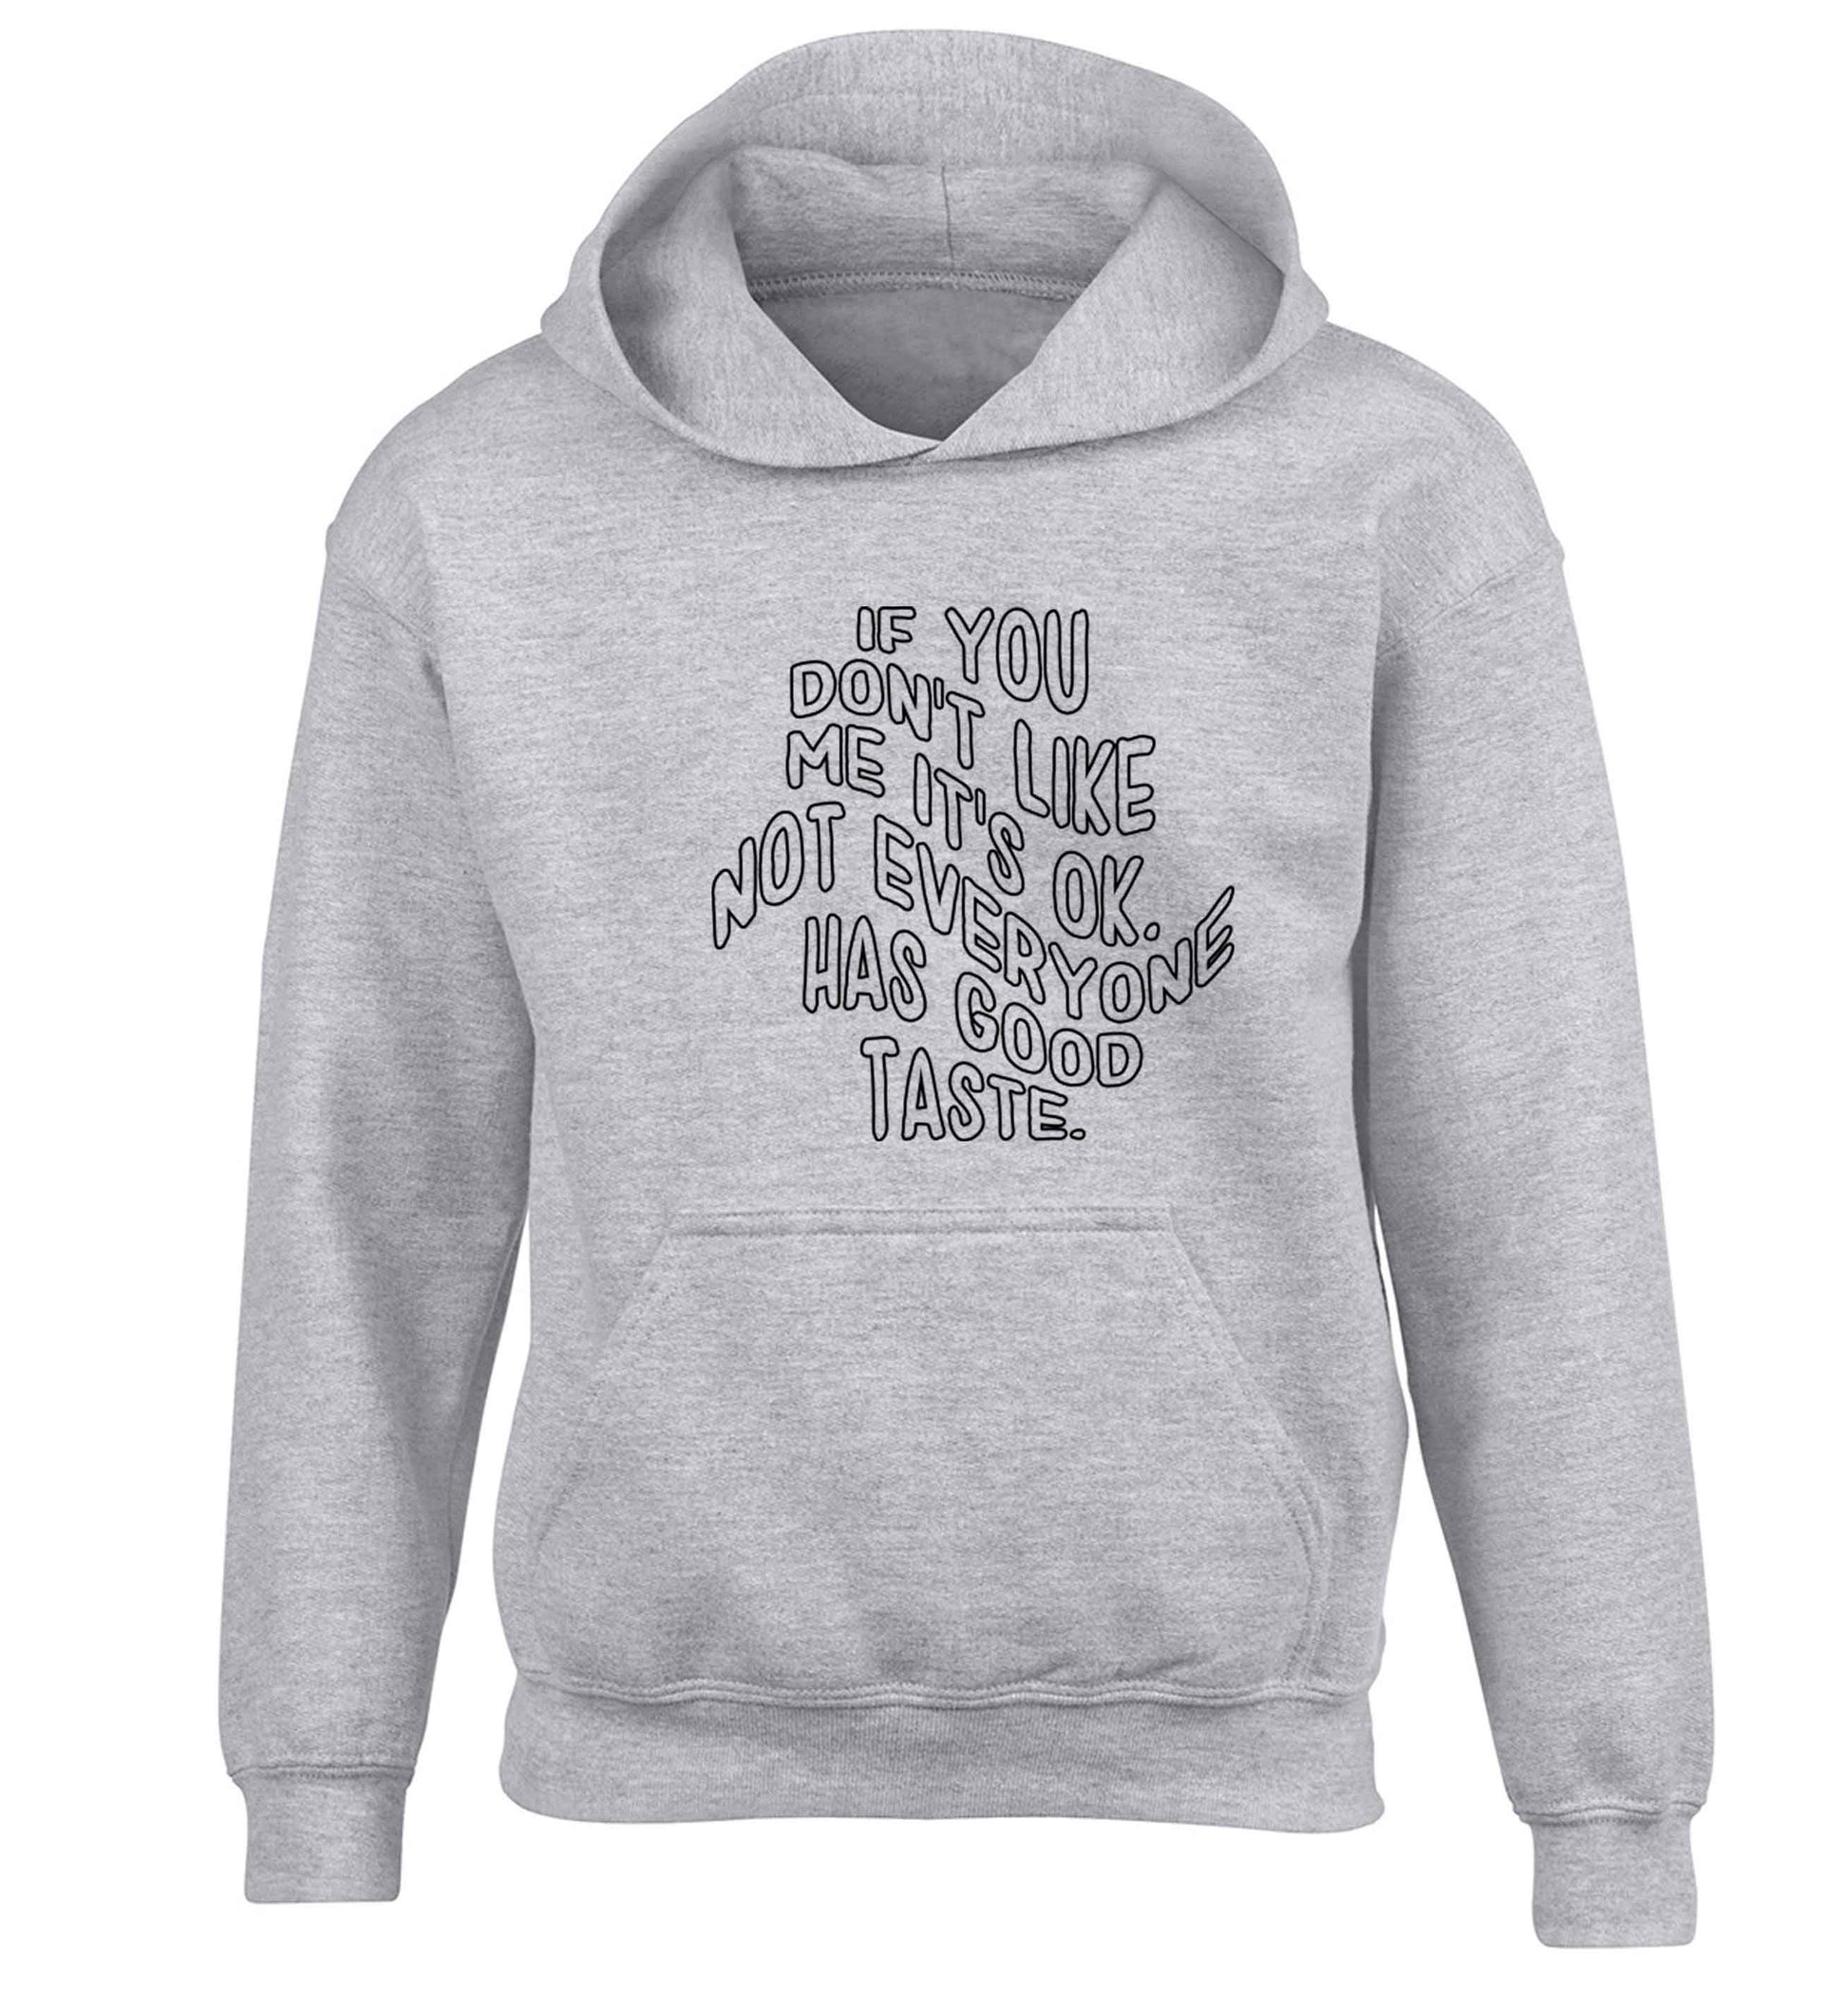 If you don't like me it's ok not everyone has good taste children's grey hoodie 12-13 Years